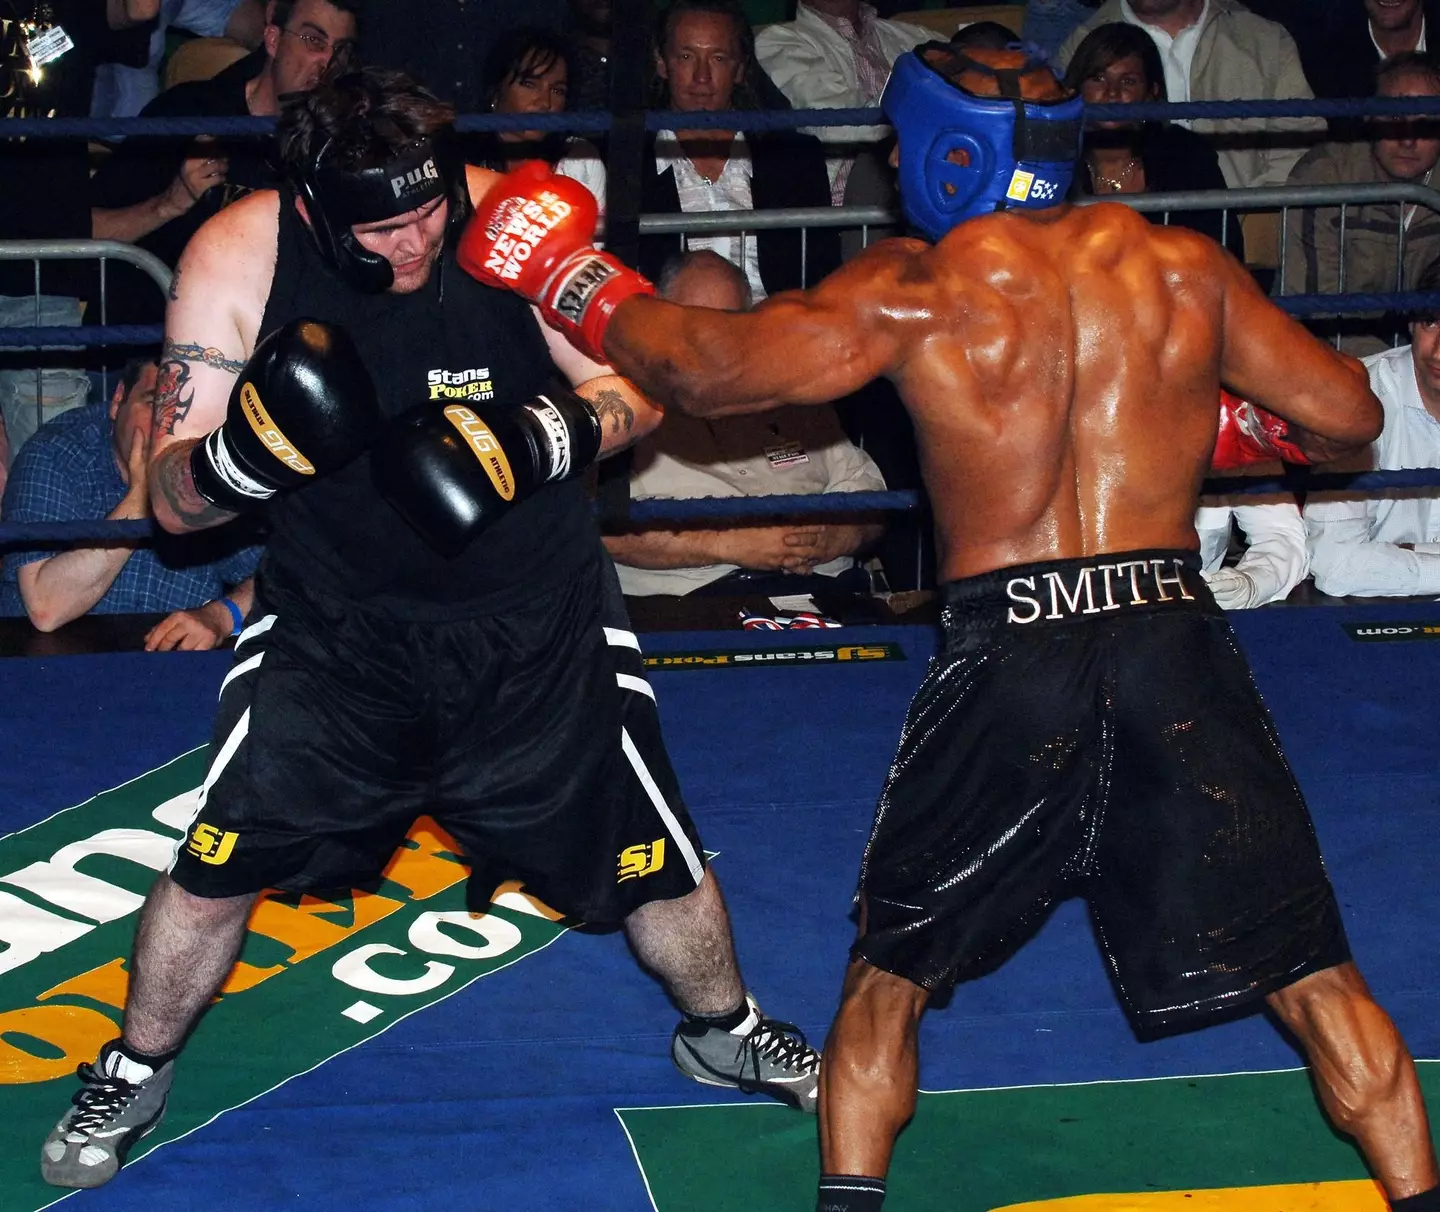 In 2005 Michael fought Mark Smith, AKA 'Rhino' from Gladiators, in a charity celebrity boxing match.